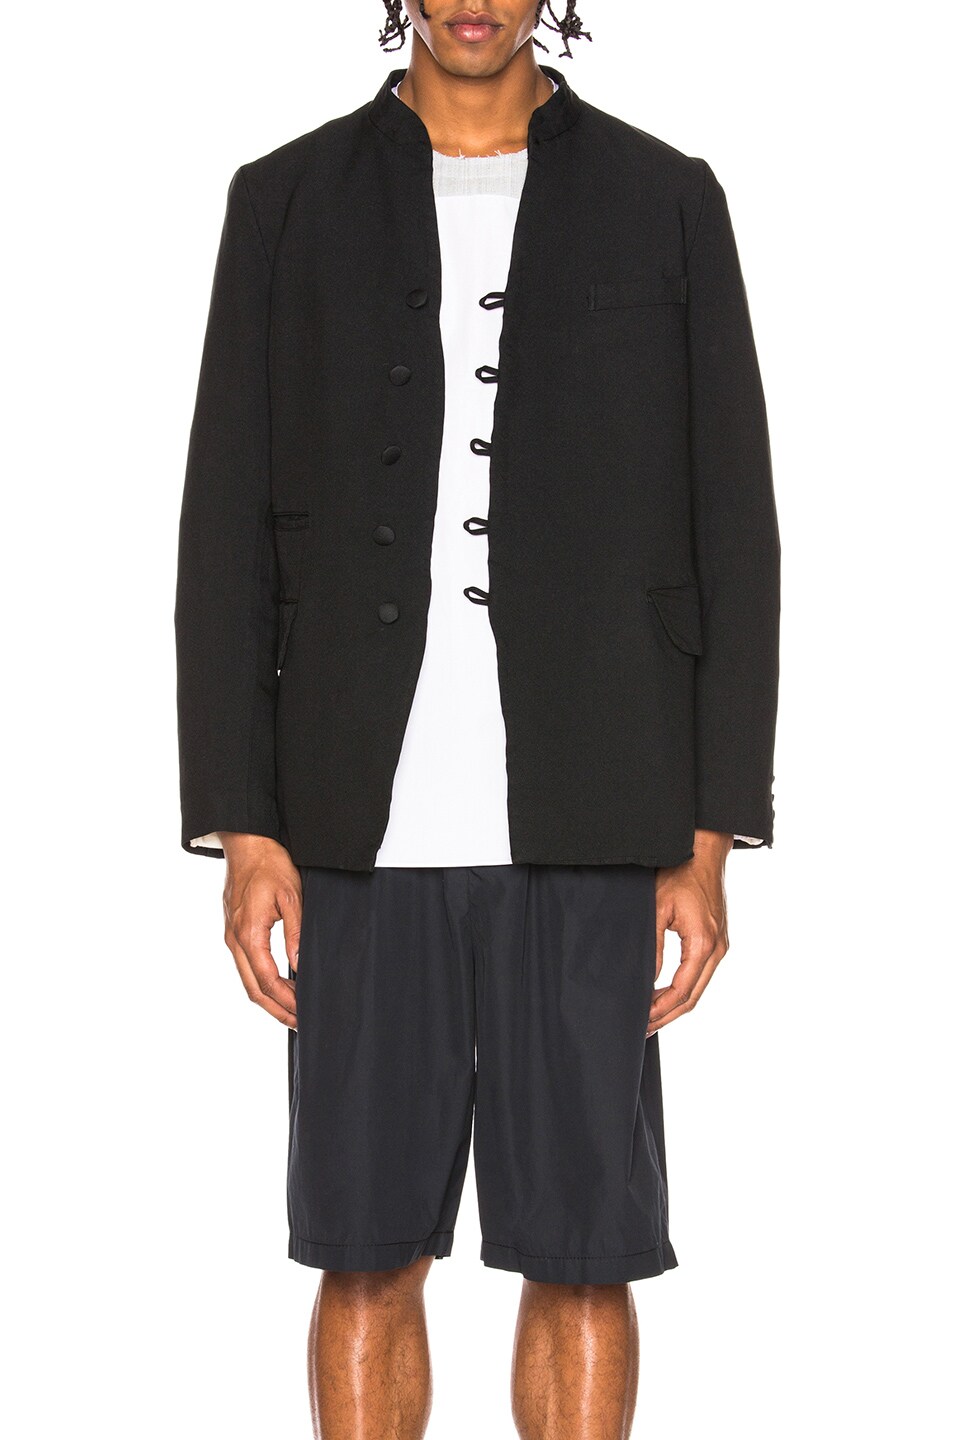 Image 1 of COMME des GARCONS Homme Plus Double Cloth Twill Jacket in Black & White